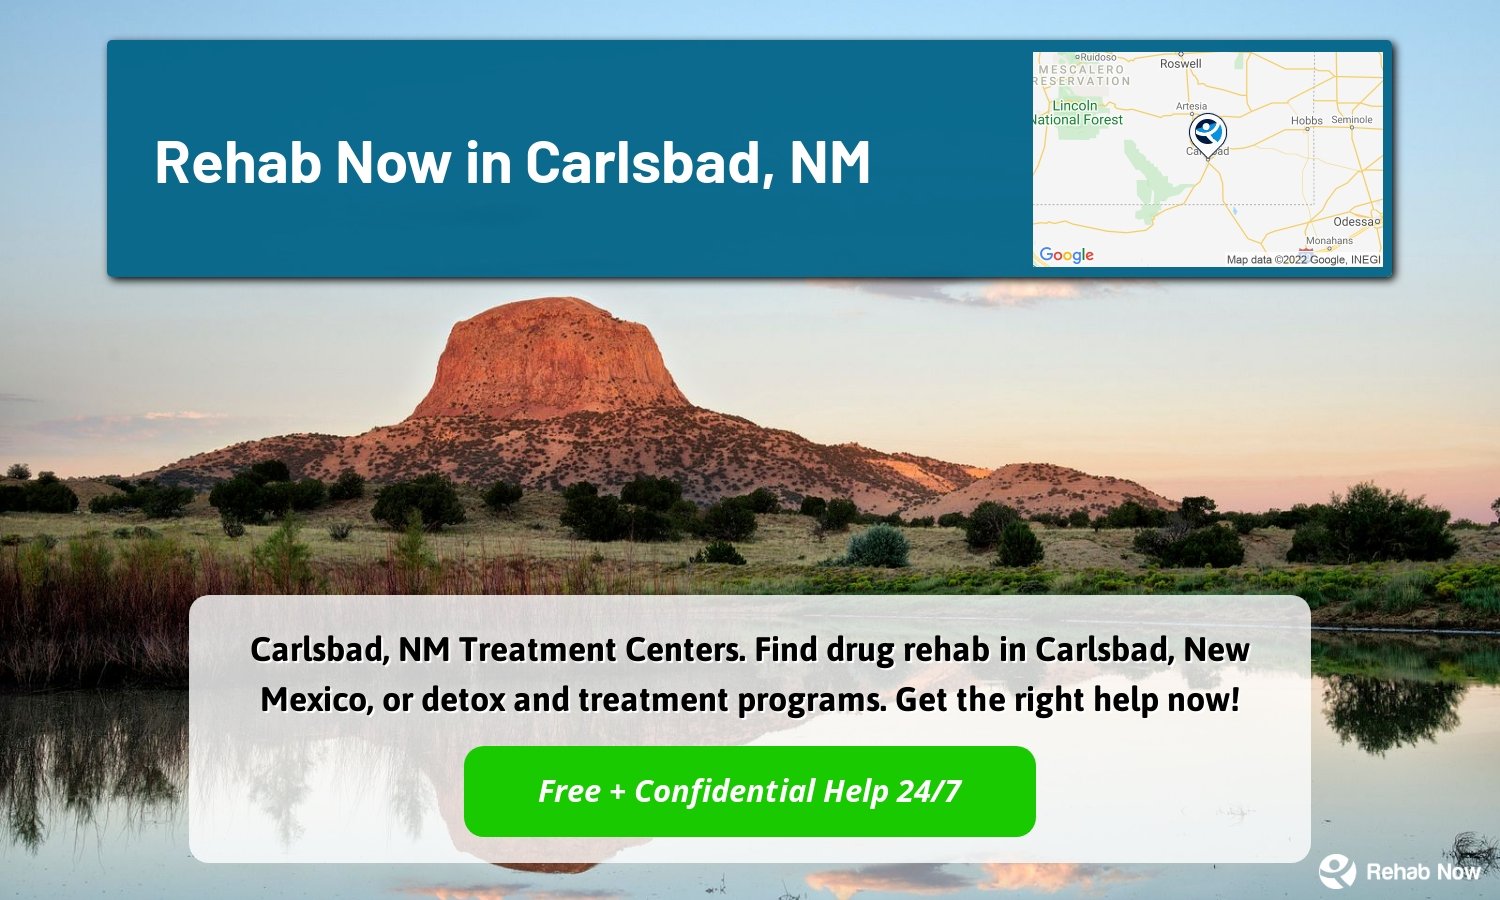 Carlsbad, NM Treatment Centers. Find drug rehab in Carlsbad, New Mexico, or detox and treatment programs. Get the right help now!